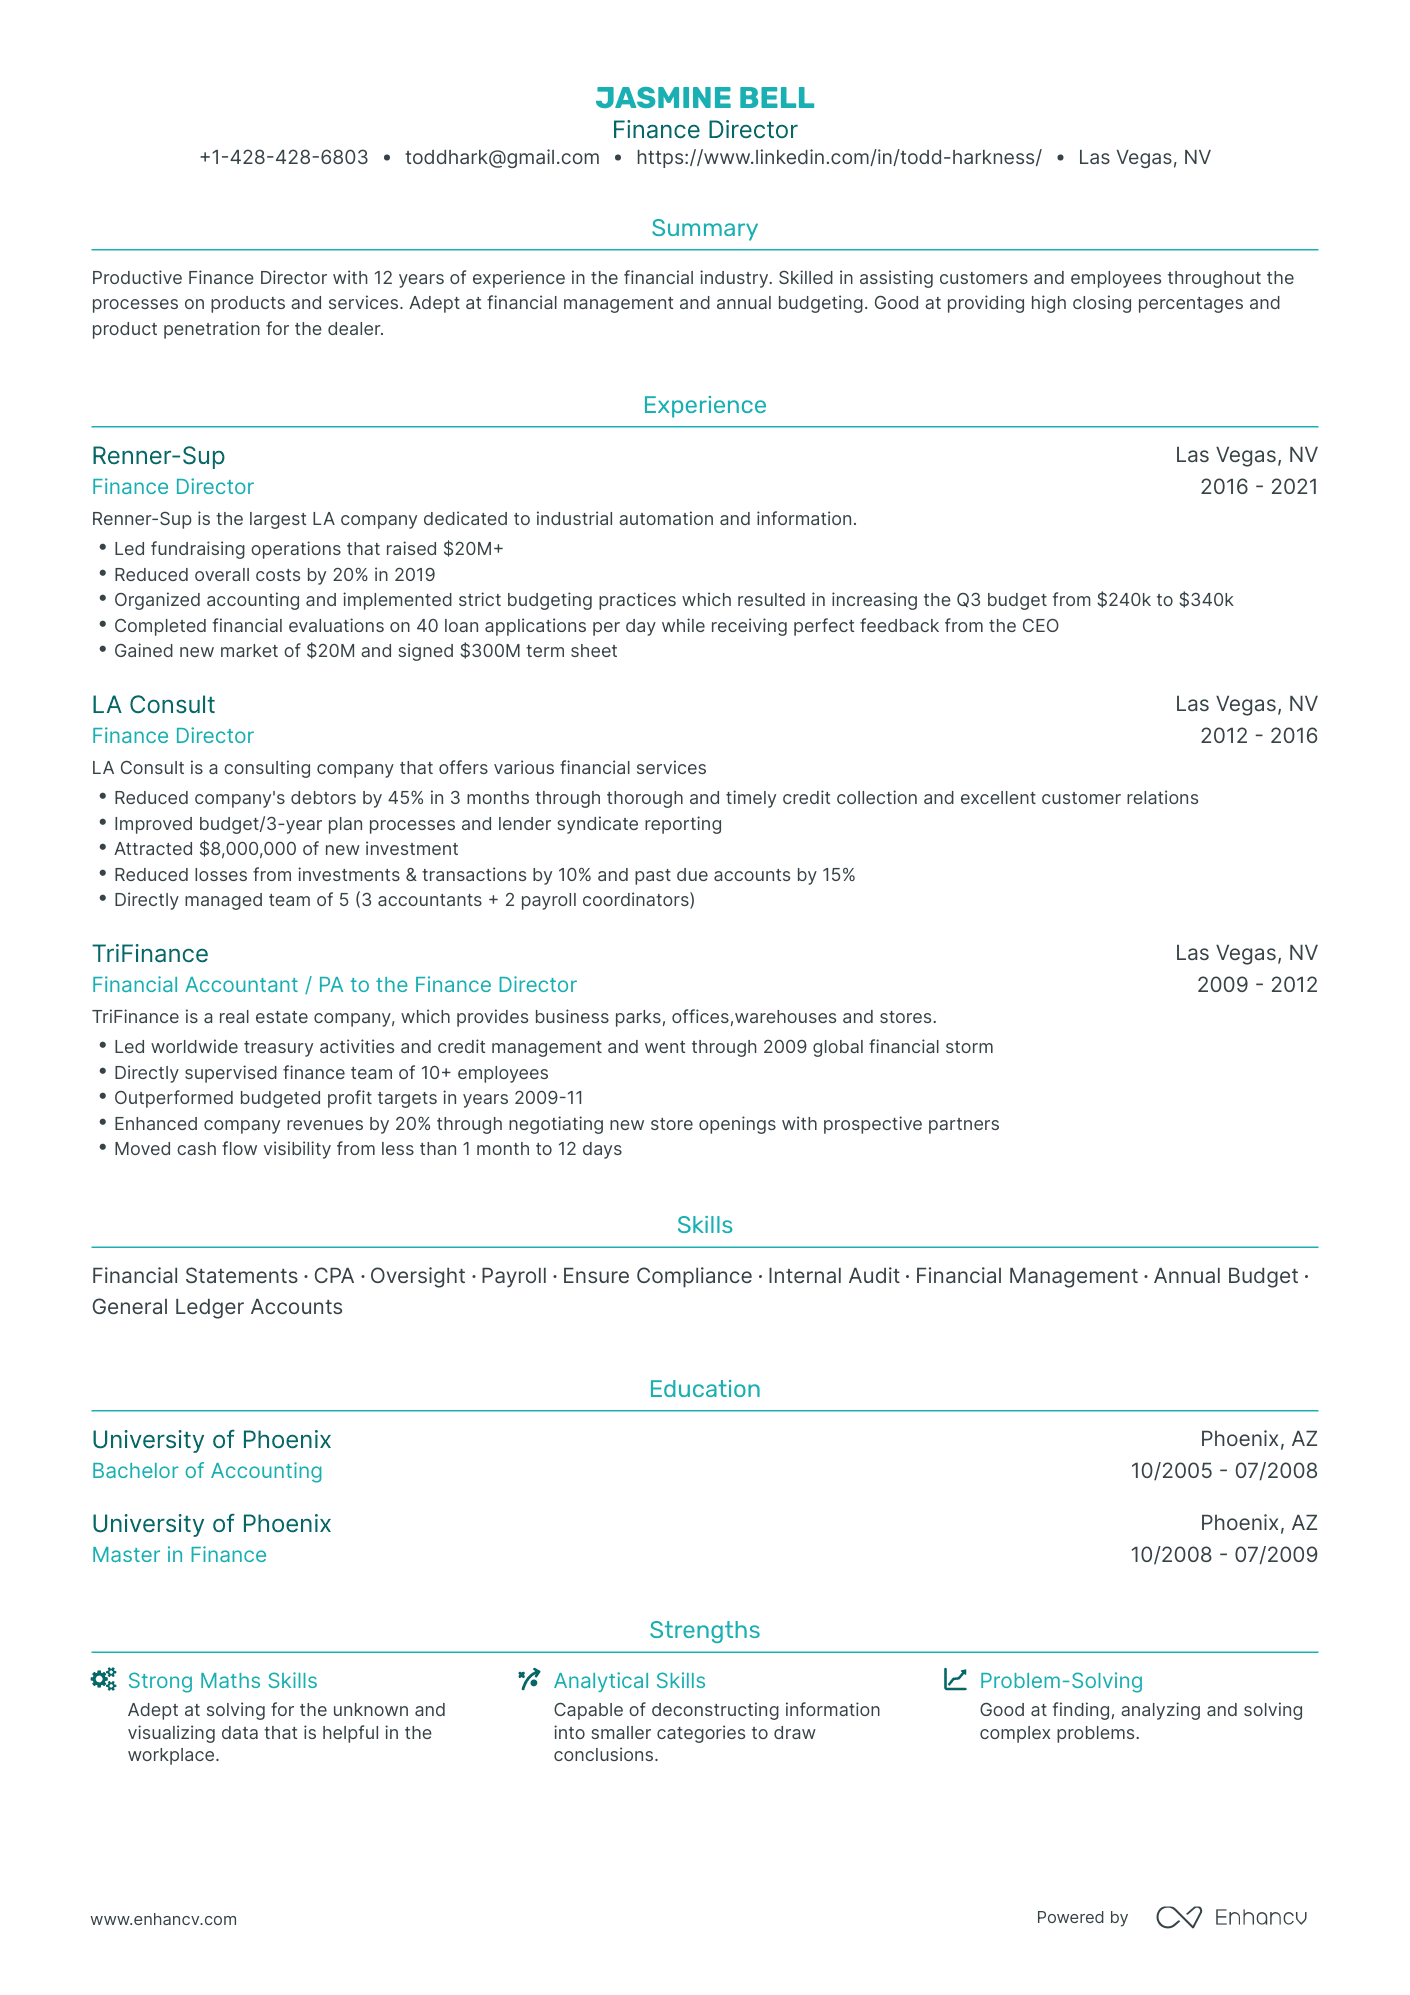 Traditional Finance Director Resume Template